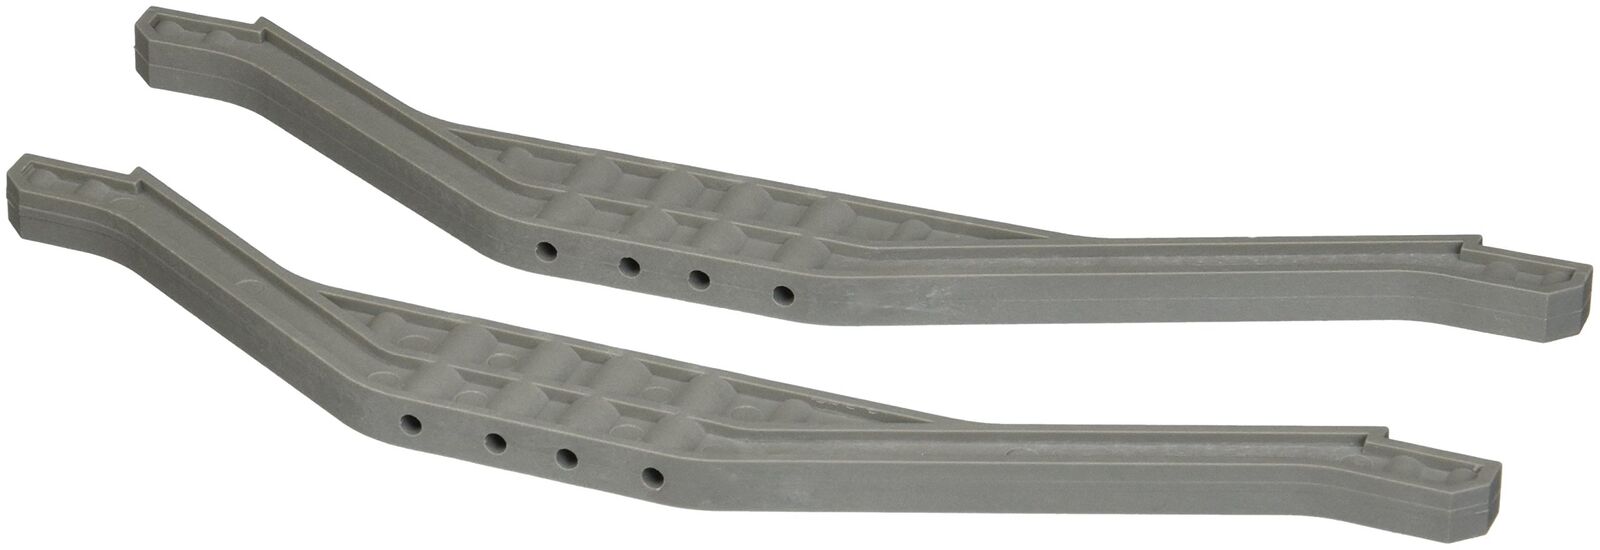 Traxxas Lower Chassis Braces, Grey (Pair) 4923A